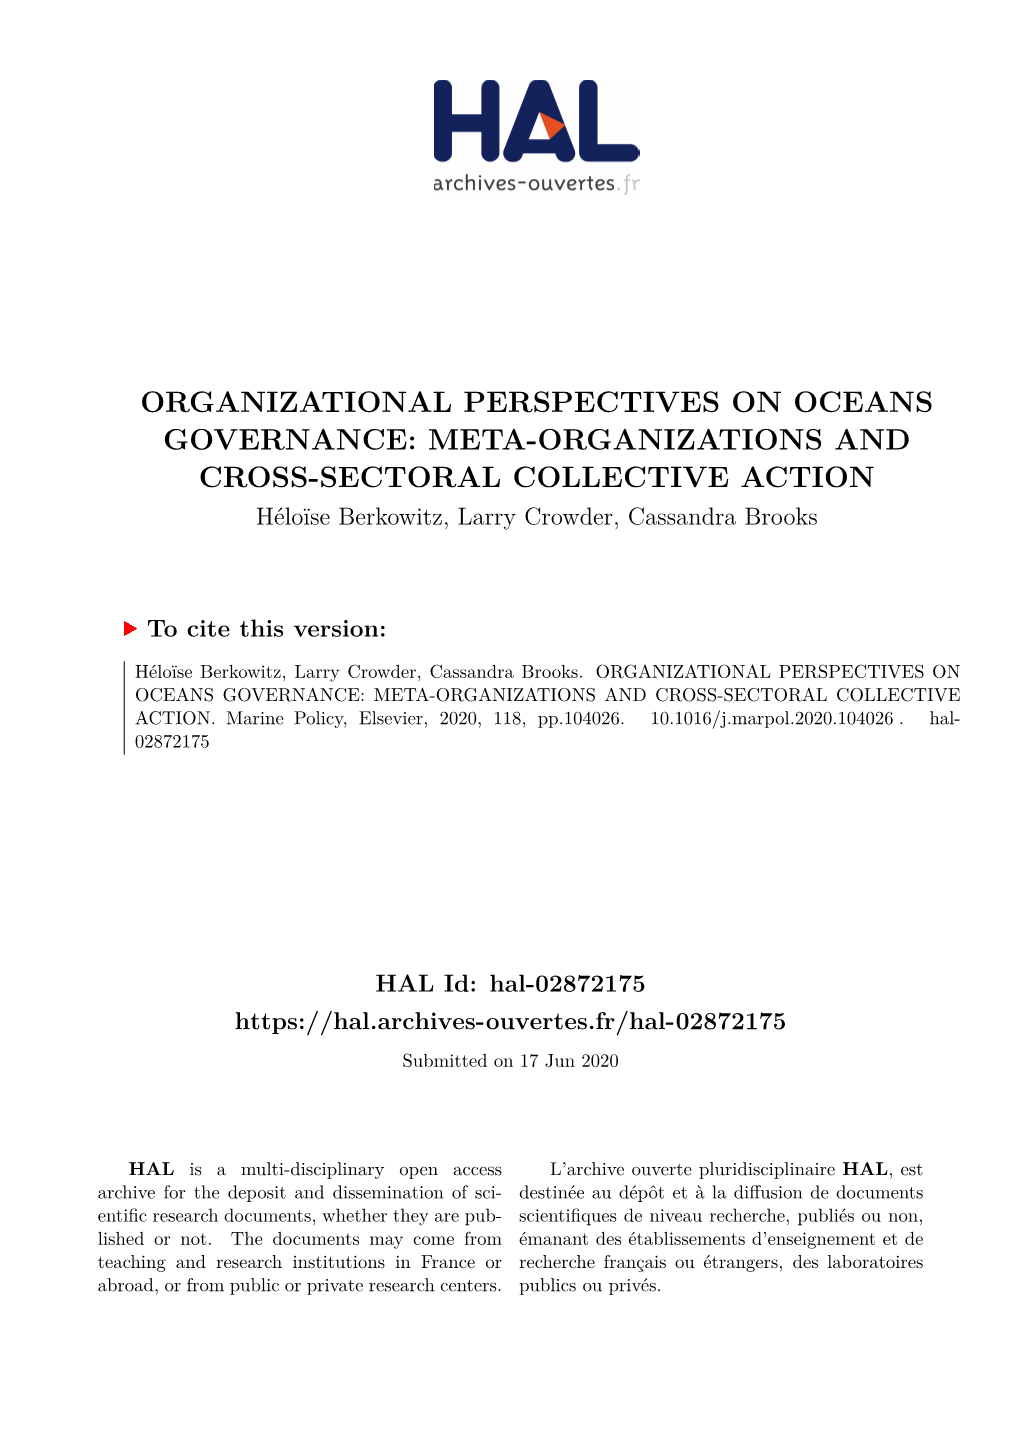 ORGANIZATIONAL PERSPECTIVES on OCEANS GOVERNANCE: META-ORGANIZATIONS and CROSS-SECTORAL COLLECTIVE ACTION Héloïse Berkowitz, Larry Crowder, Cassandra Brooks